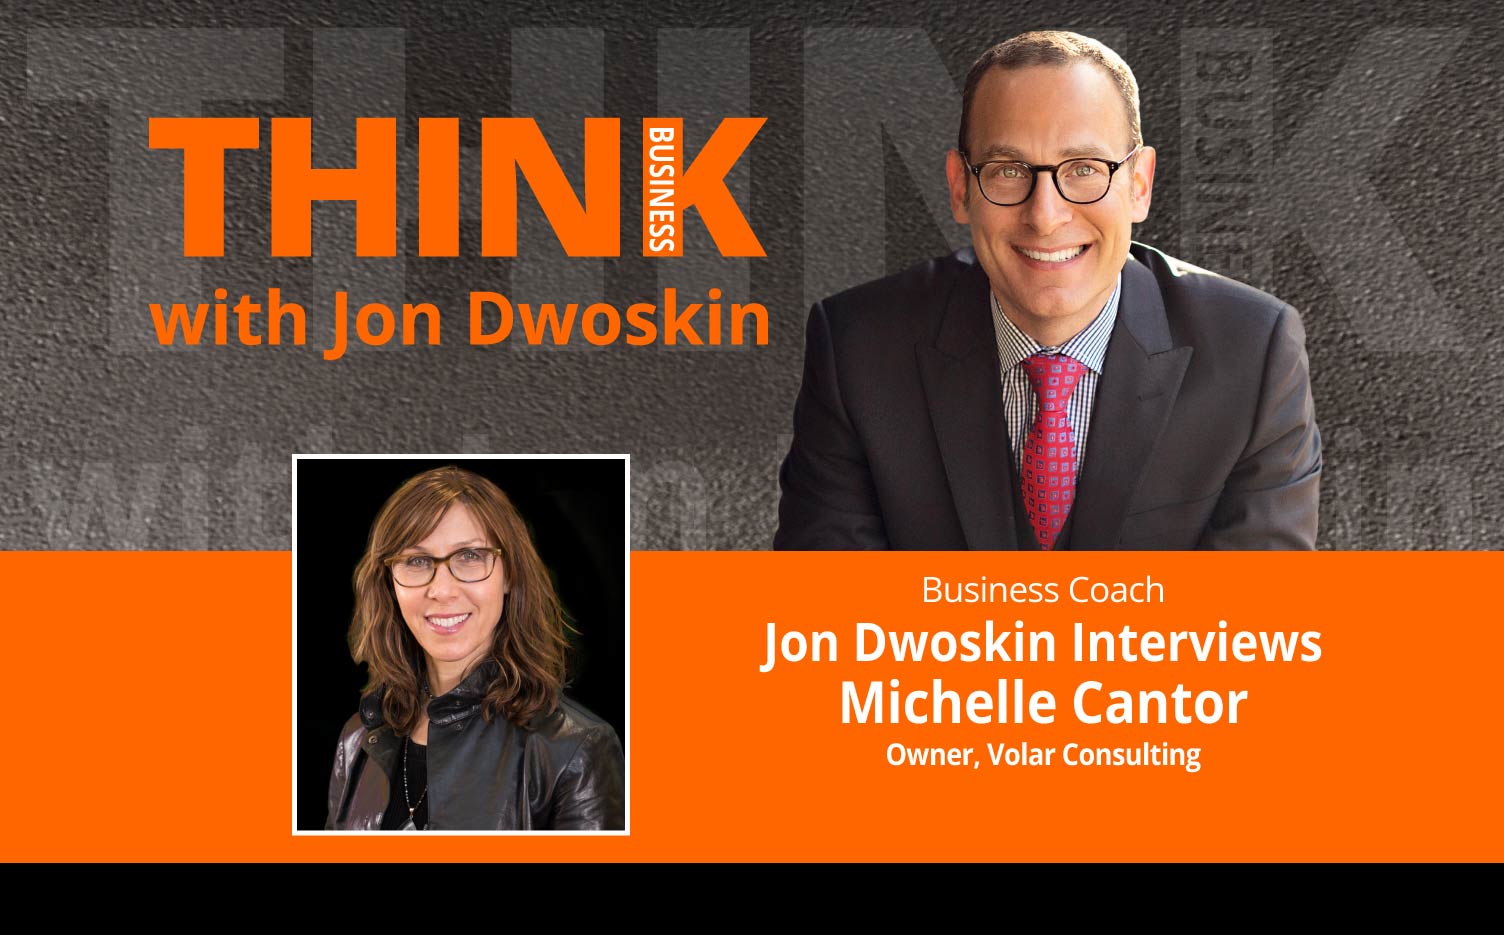 THINK Business Podcast: Jon Dwoskin Interviews Michelle Cantor, Owner, Volar Consulting